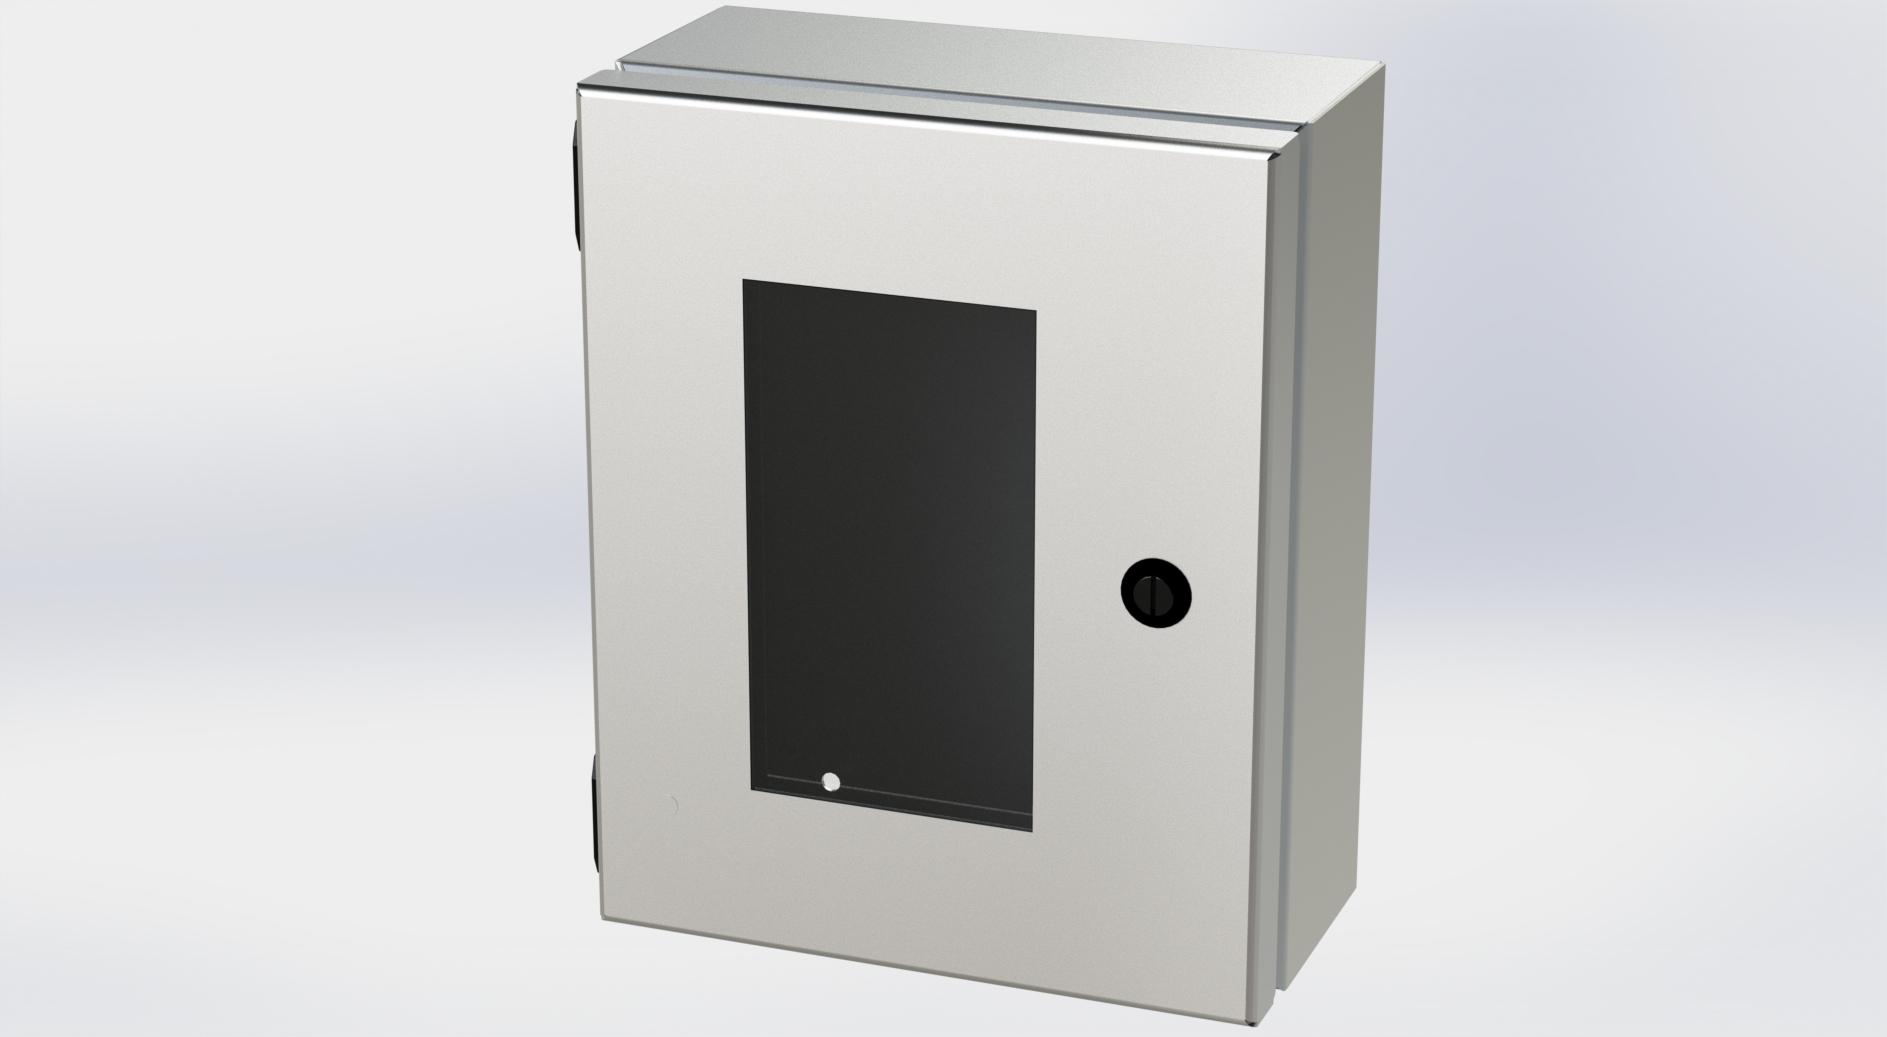 Saginaw Control SCE-1008ELJWSS6 S.S. ELJ Enclosure W/Viewing Window, Height:10.00", Width:8.00", Depth:4.00", #4 brushed finish on all exterior surfaces. Optional panels are powder coated white.